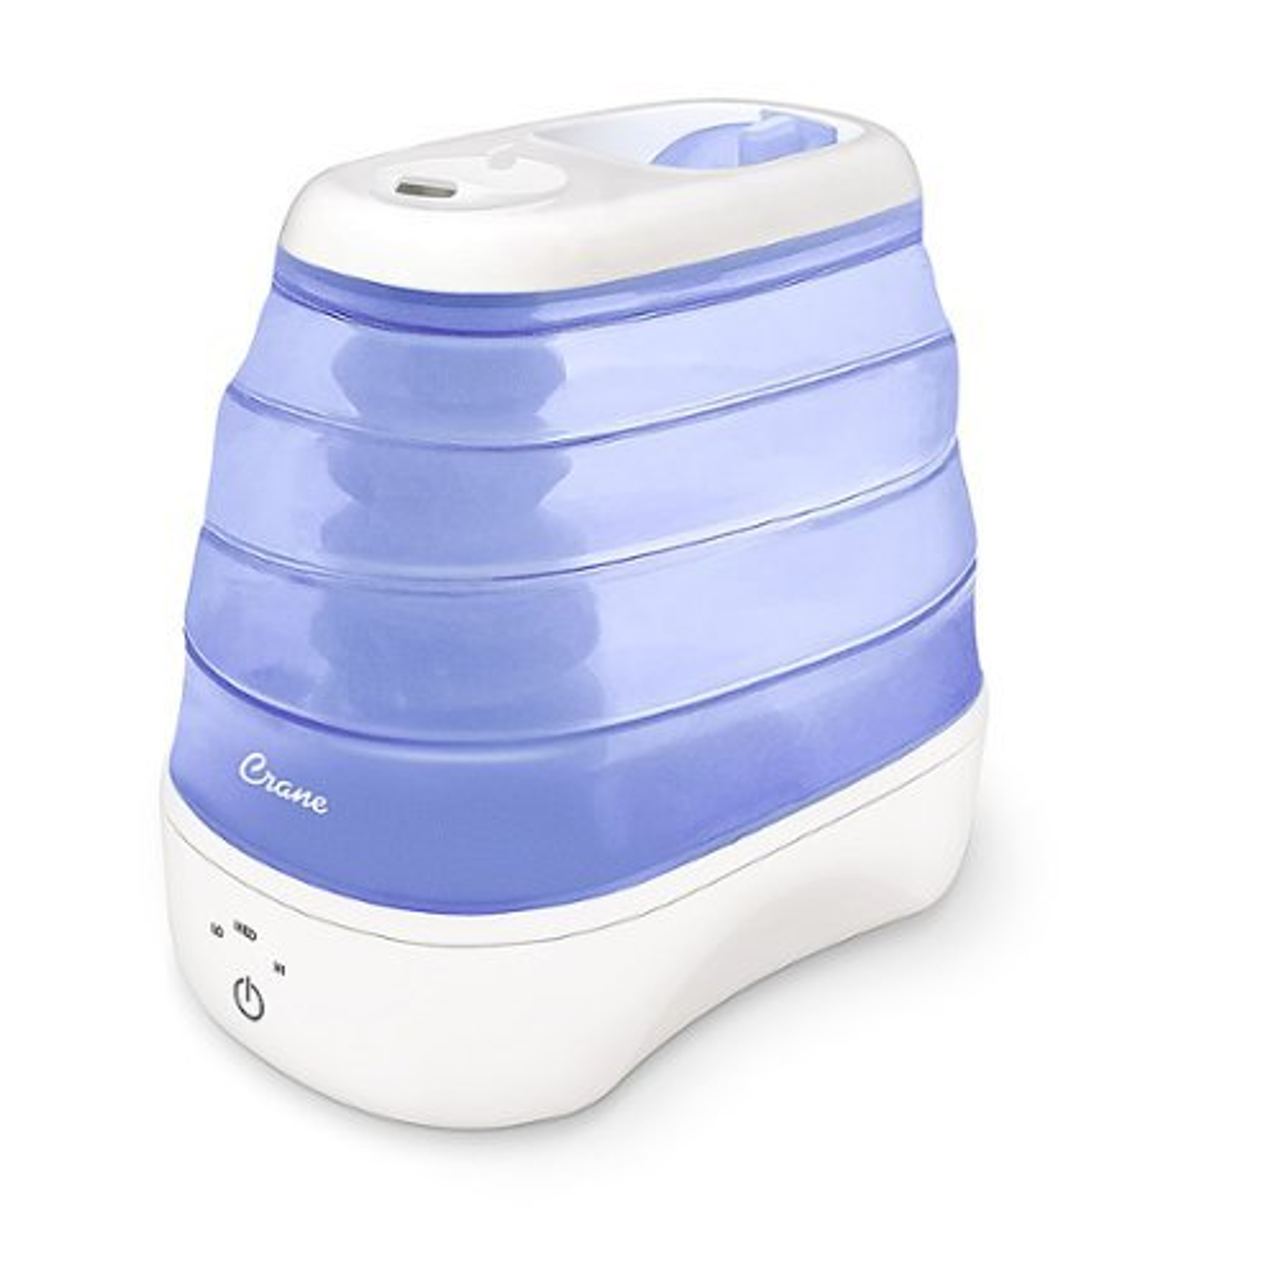 CRANE - 1 Gal. Cool Mist Collapsible Humidifier, Blue/White, Top Fill - Blue/White